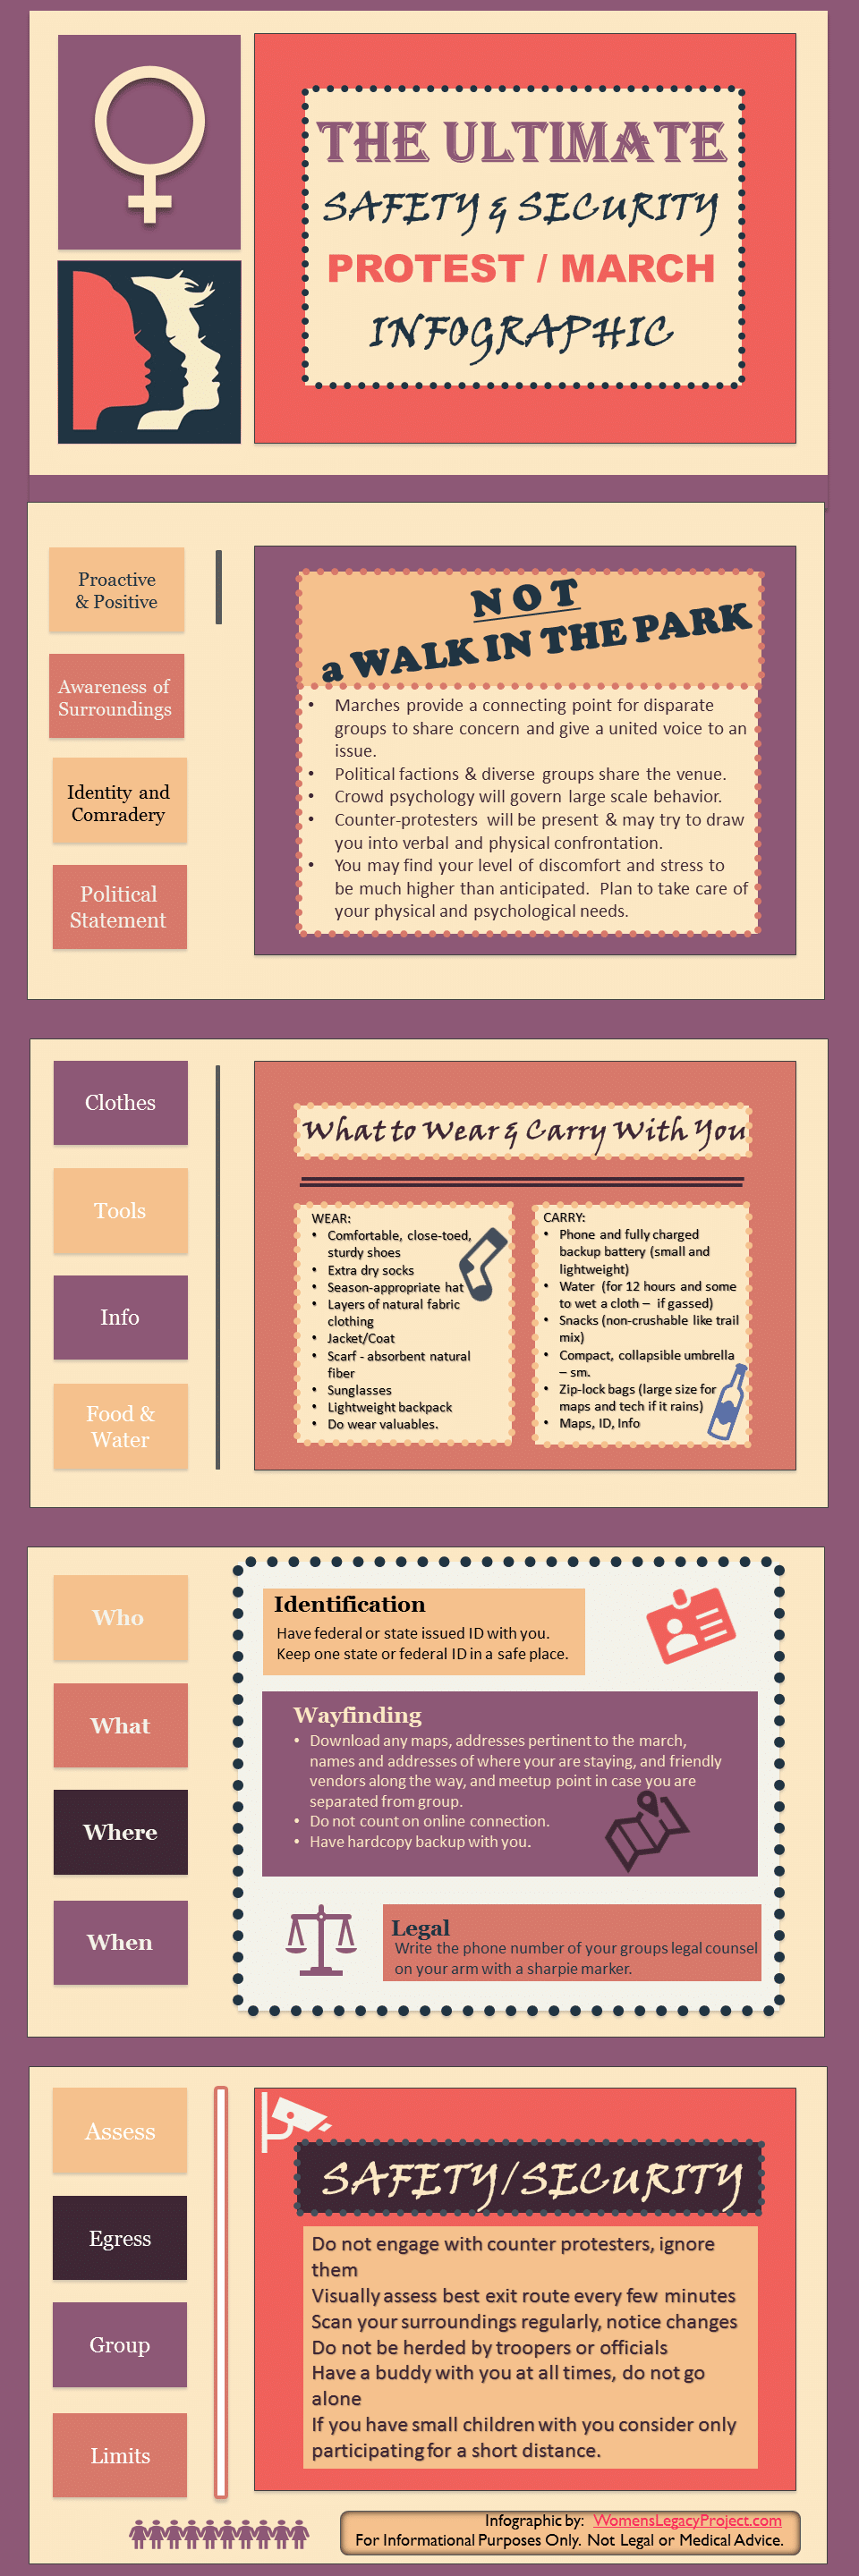 Security Infographic for the Women's March